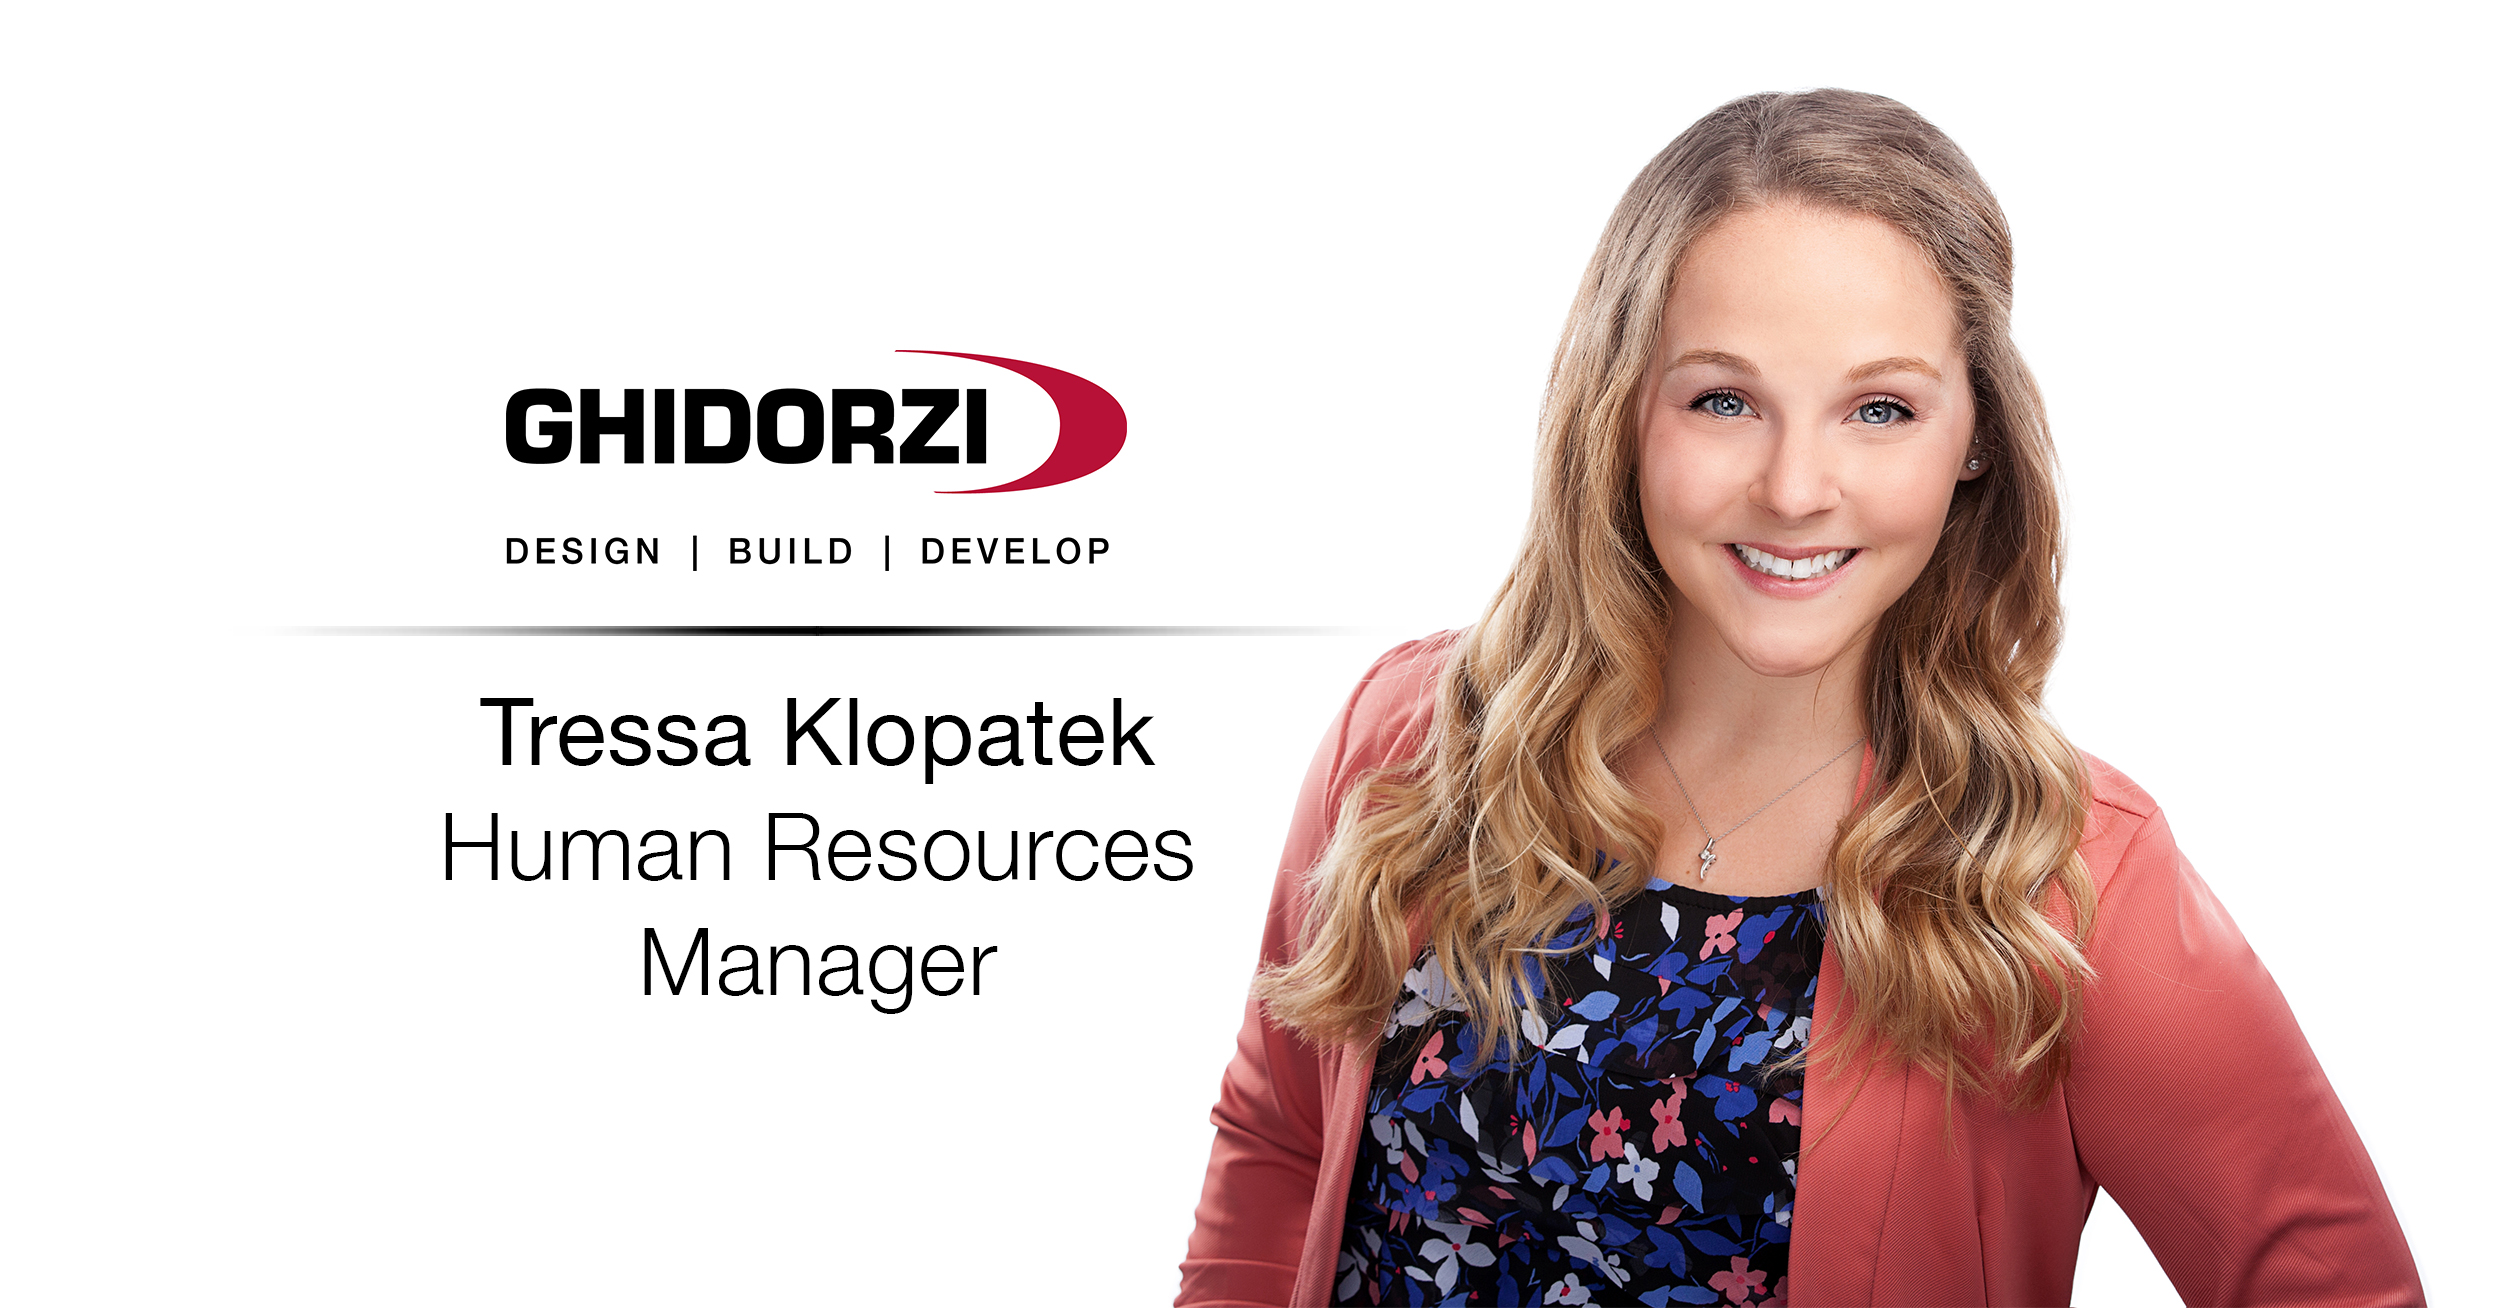 Tressa Klopatek Promoted to HR Manager of Ghidorzi Companies